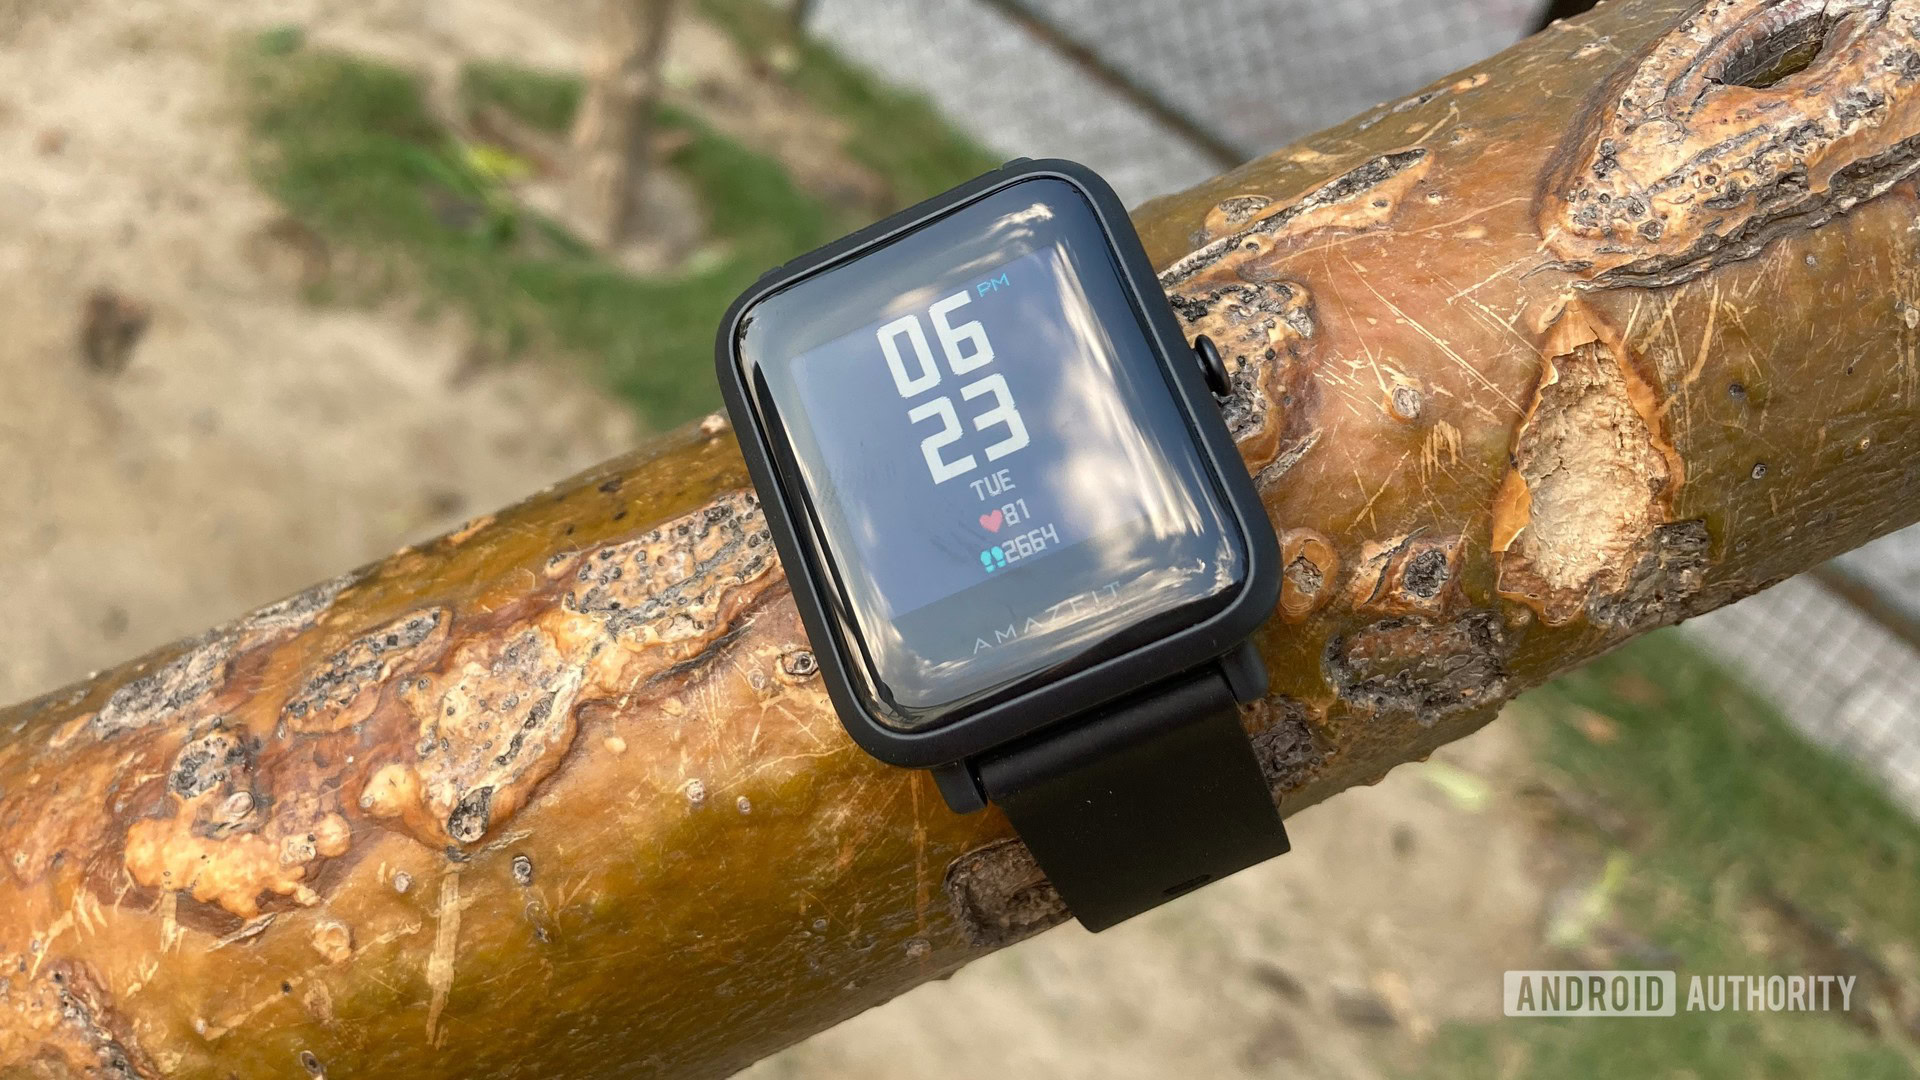 Amazfit Bip S Lite review: The go-to fitness tracker under Rs 4K?